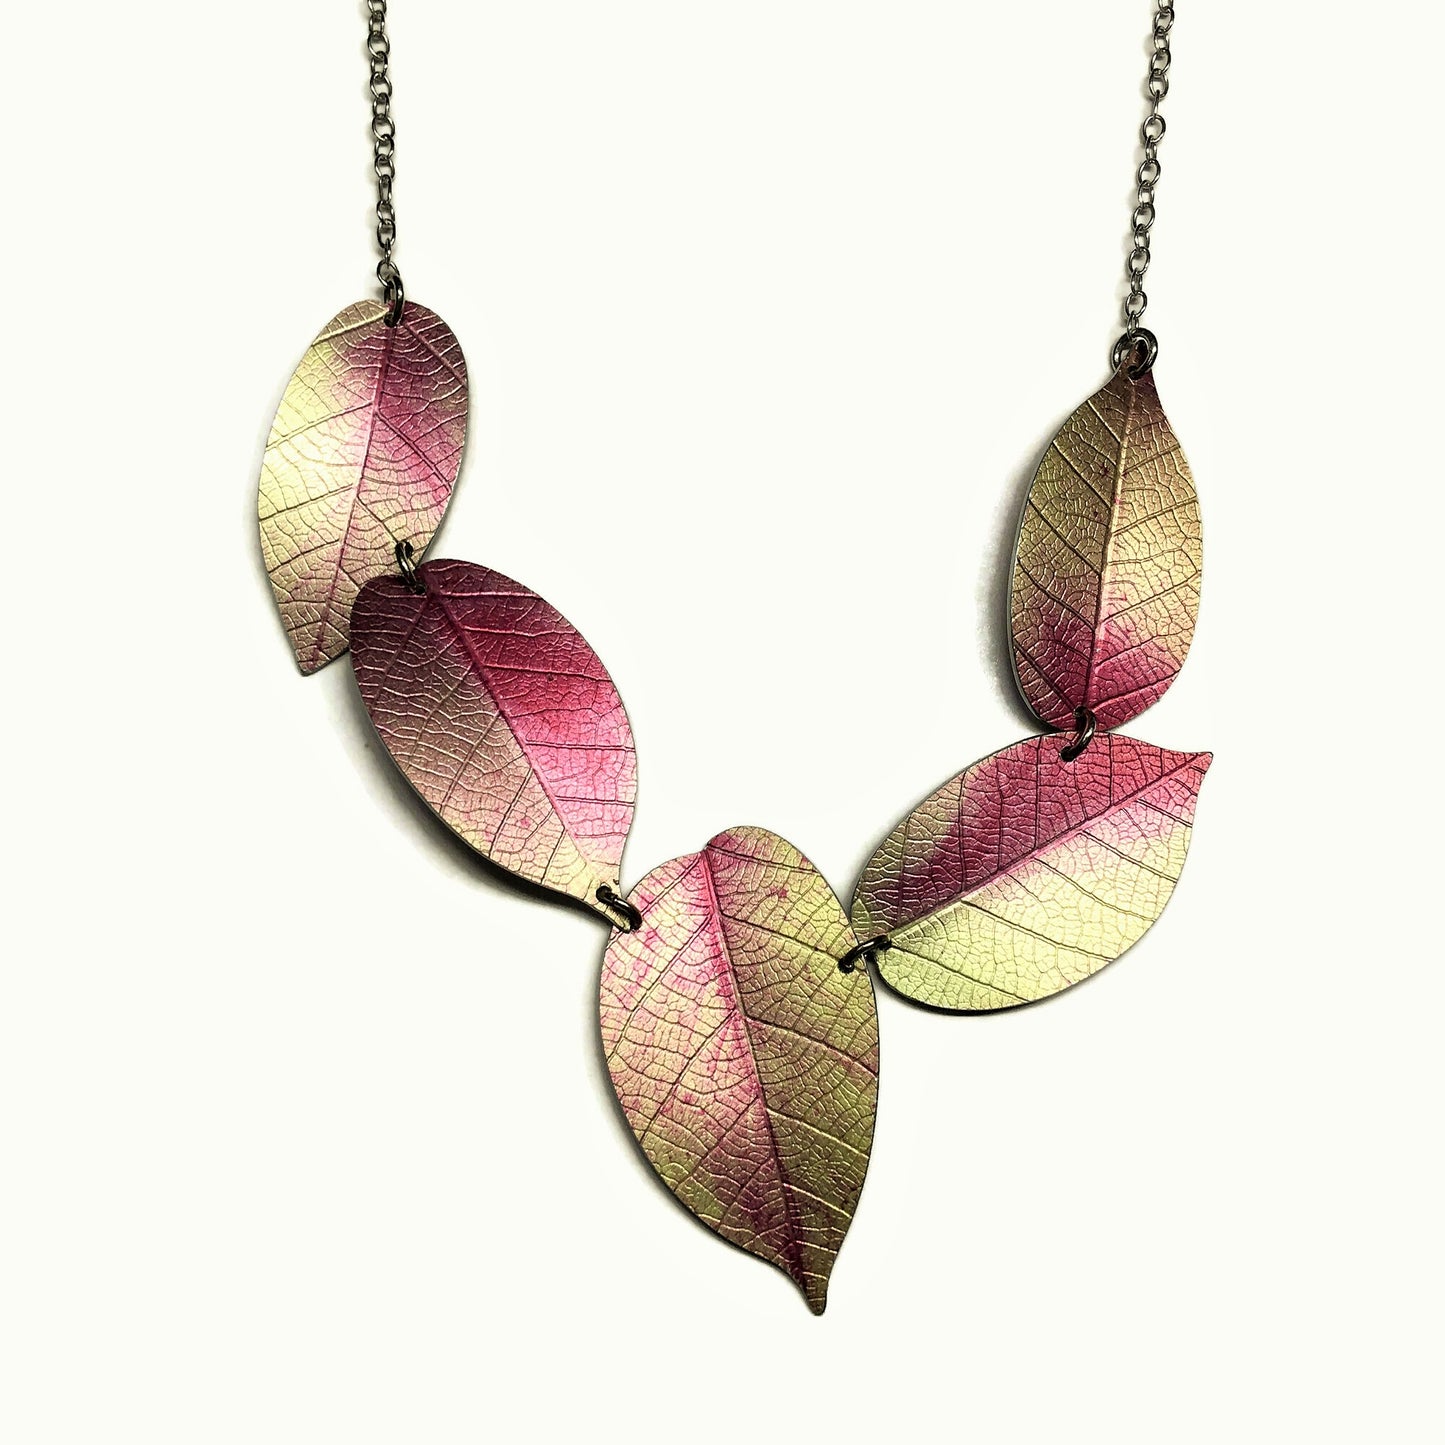 Asymmetric pink Cherry necklace by Photofinish Jewellery